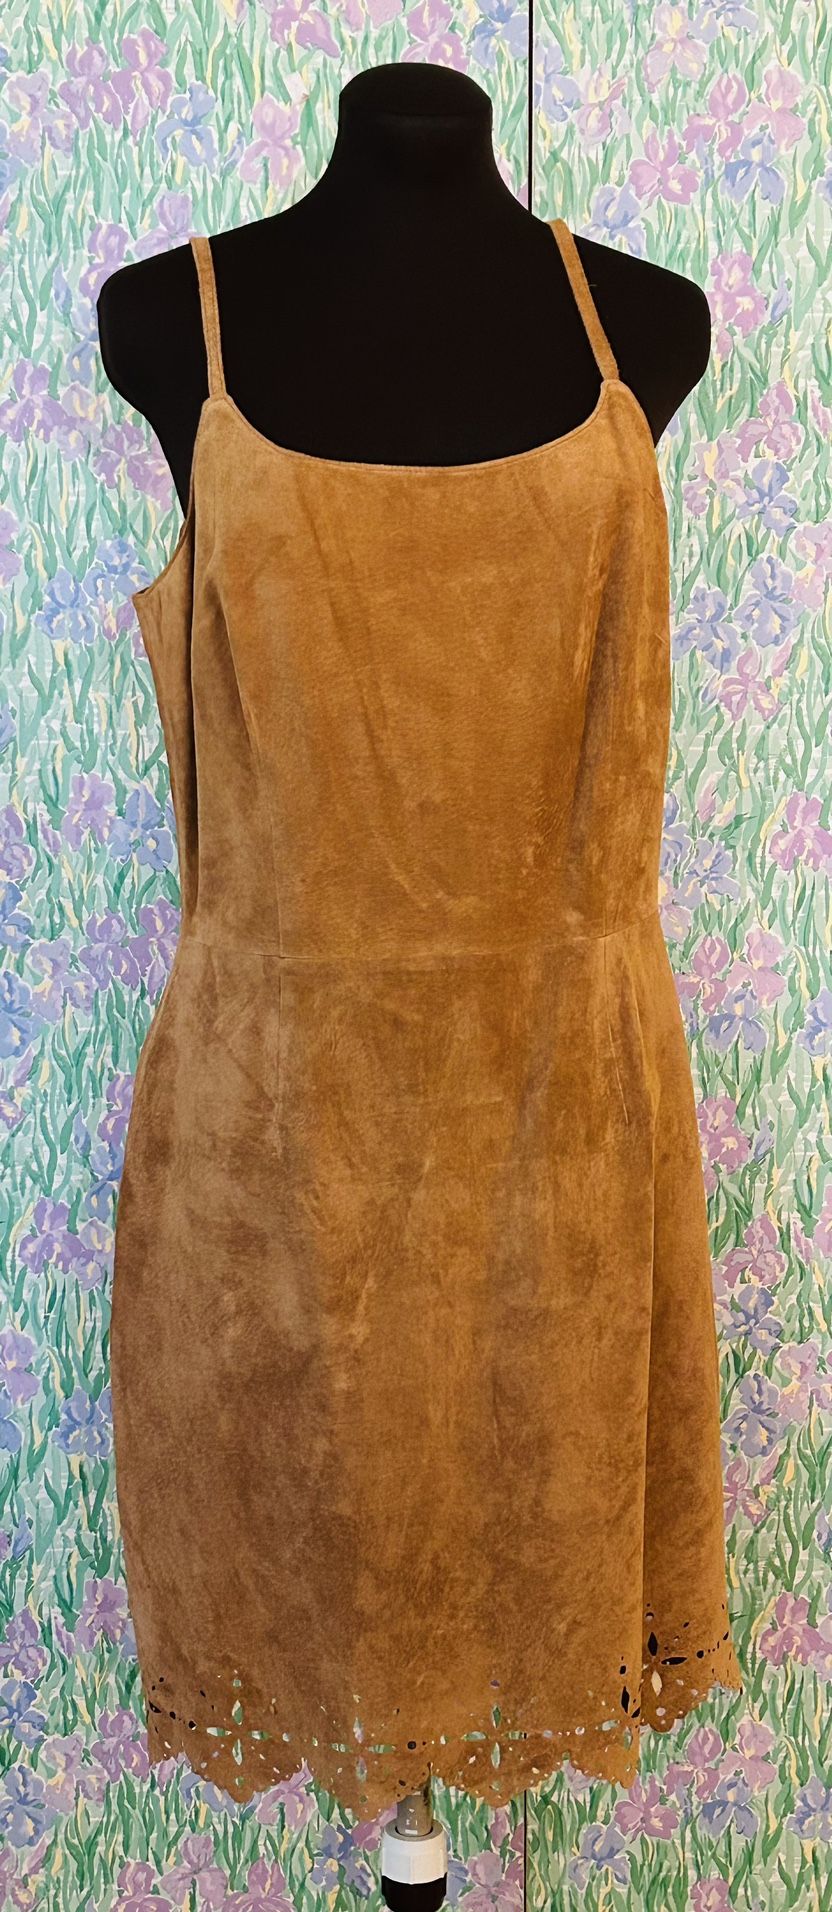 Newport News Styleworks Strapless Leather Dress With Laser Cut Flower Trim Size 14